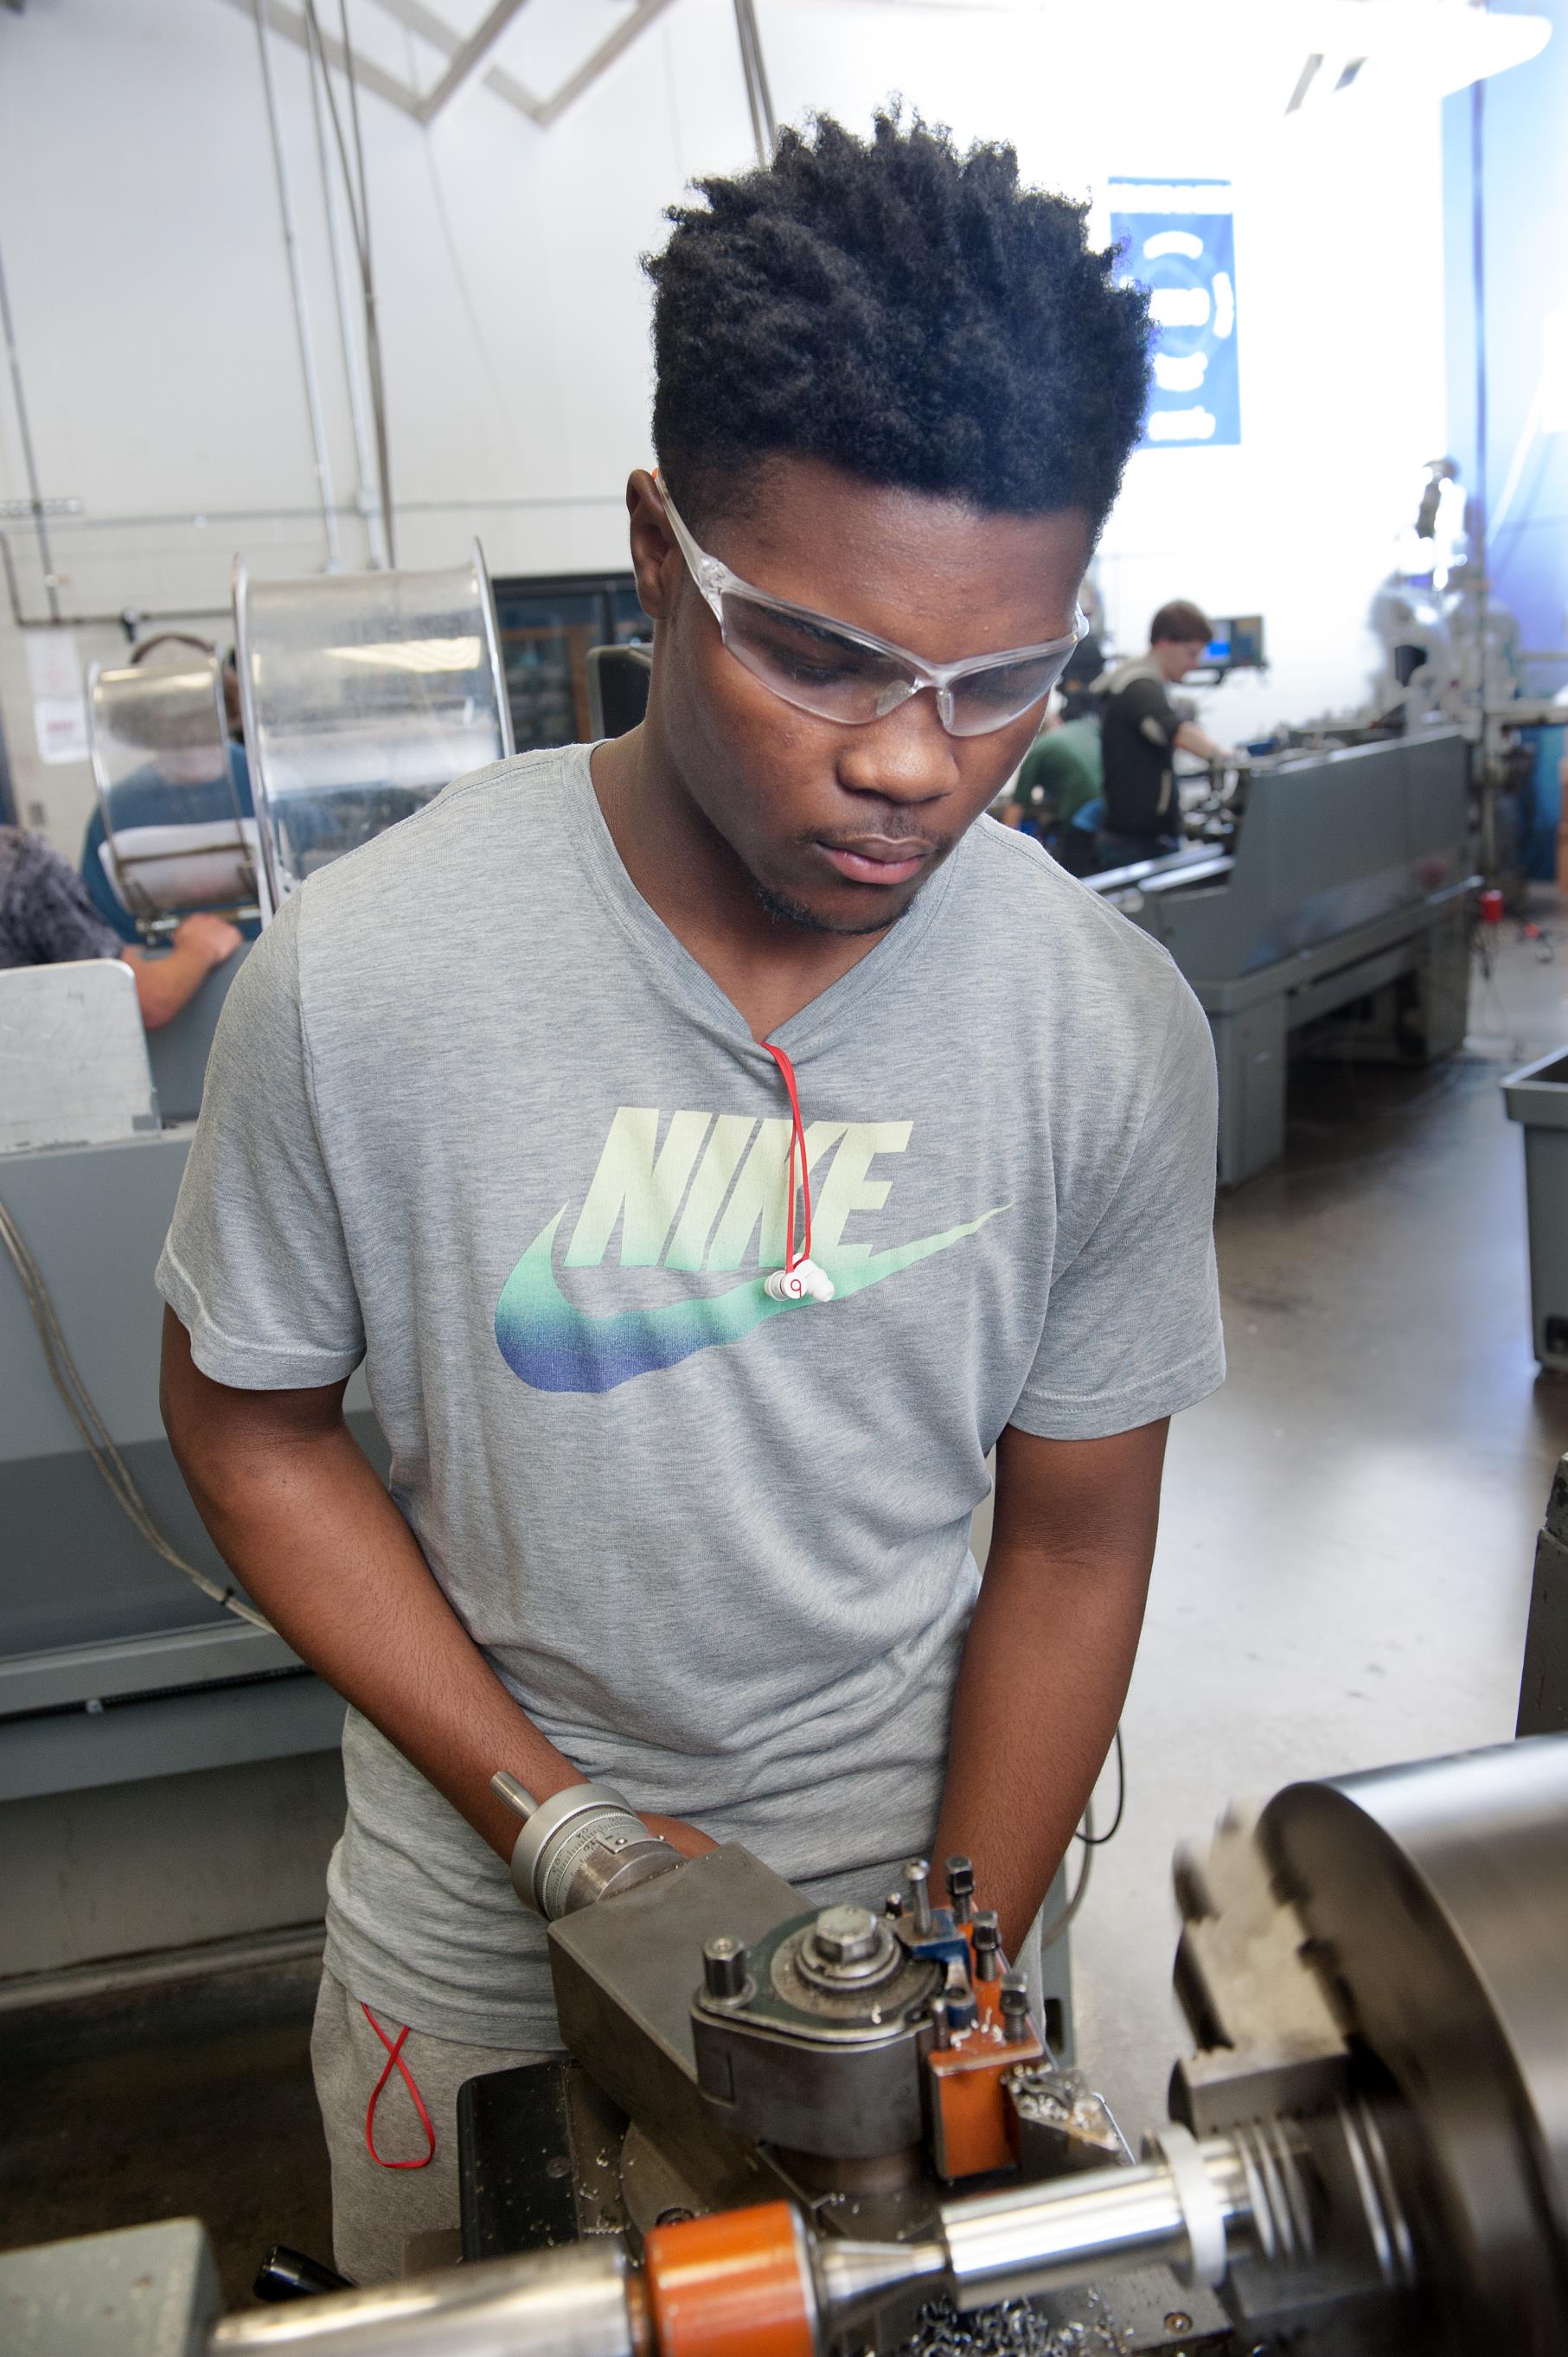 Male Precision Machining student working on equipment in the lab.